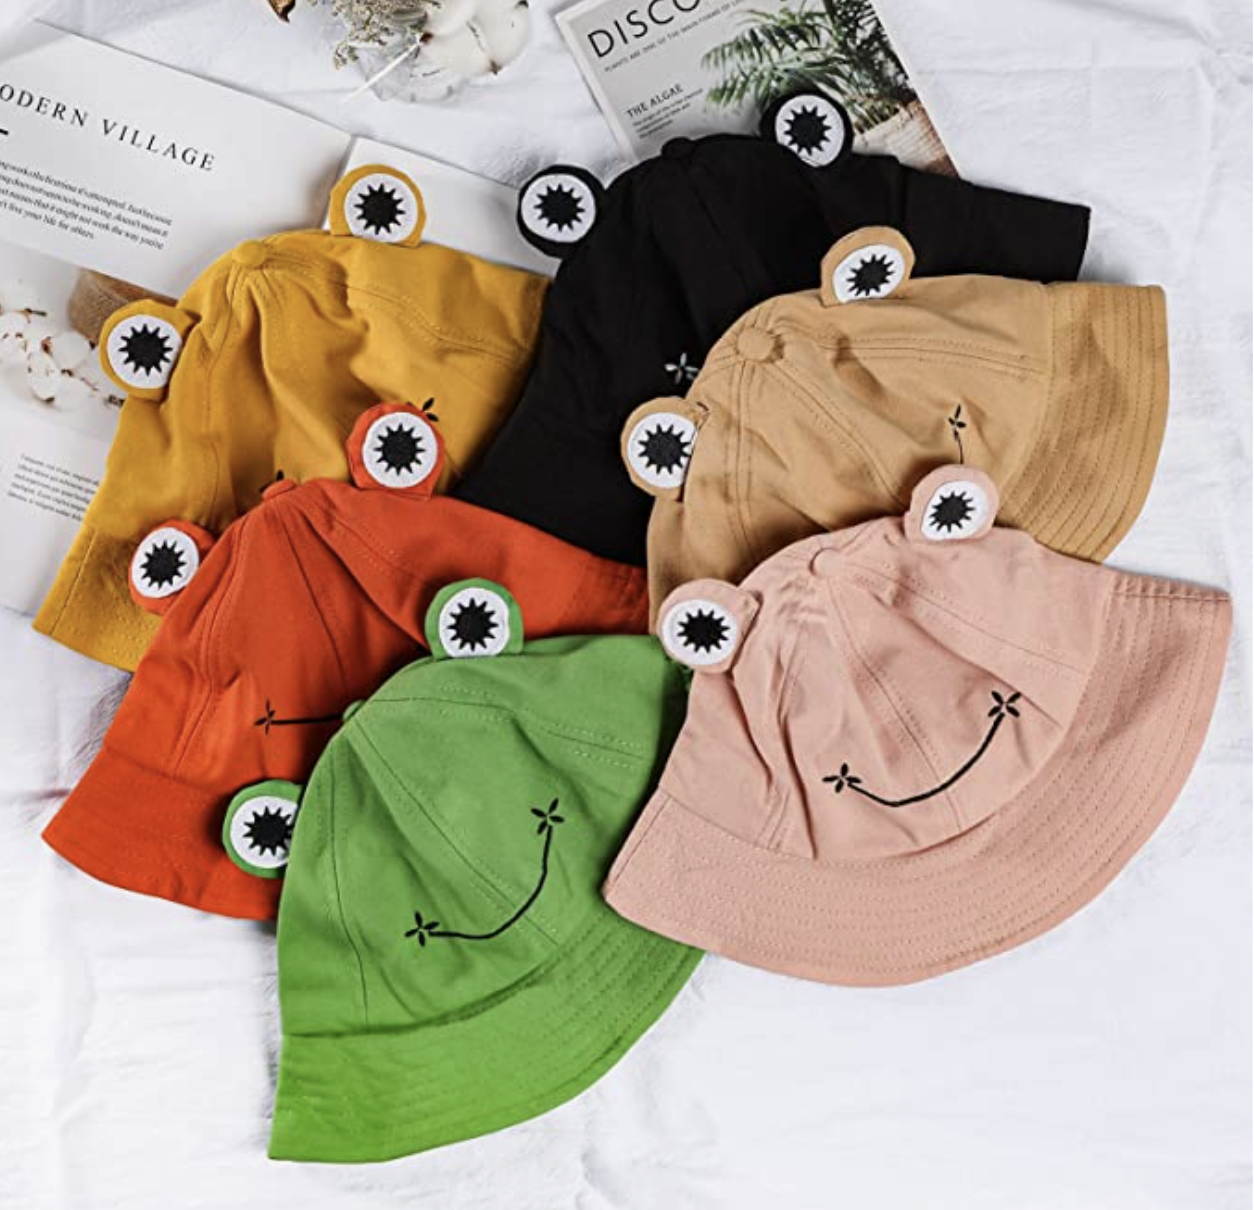 The frog hats all laying on a bed